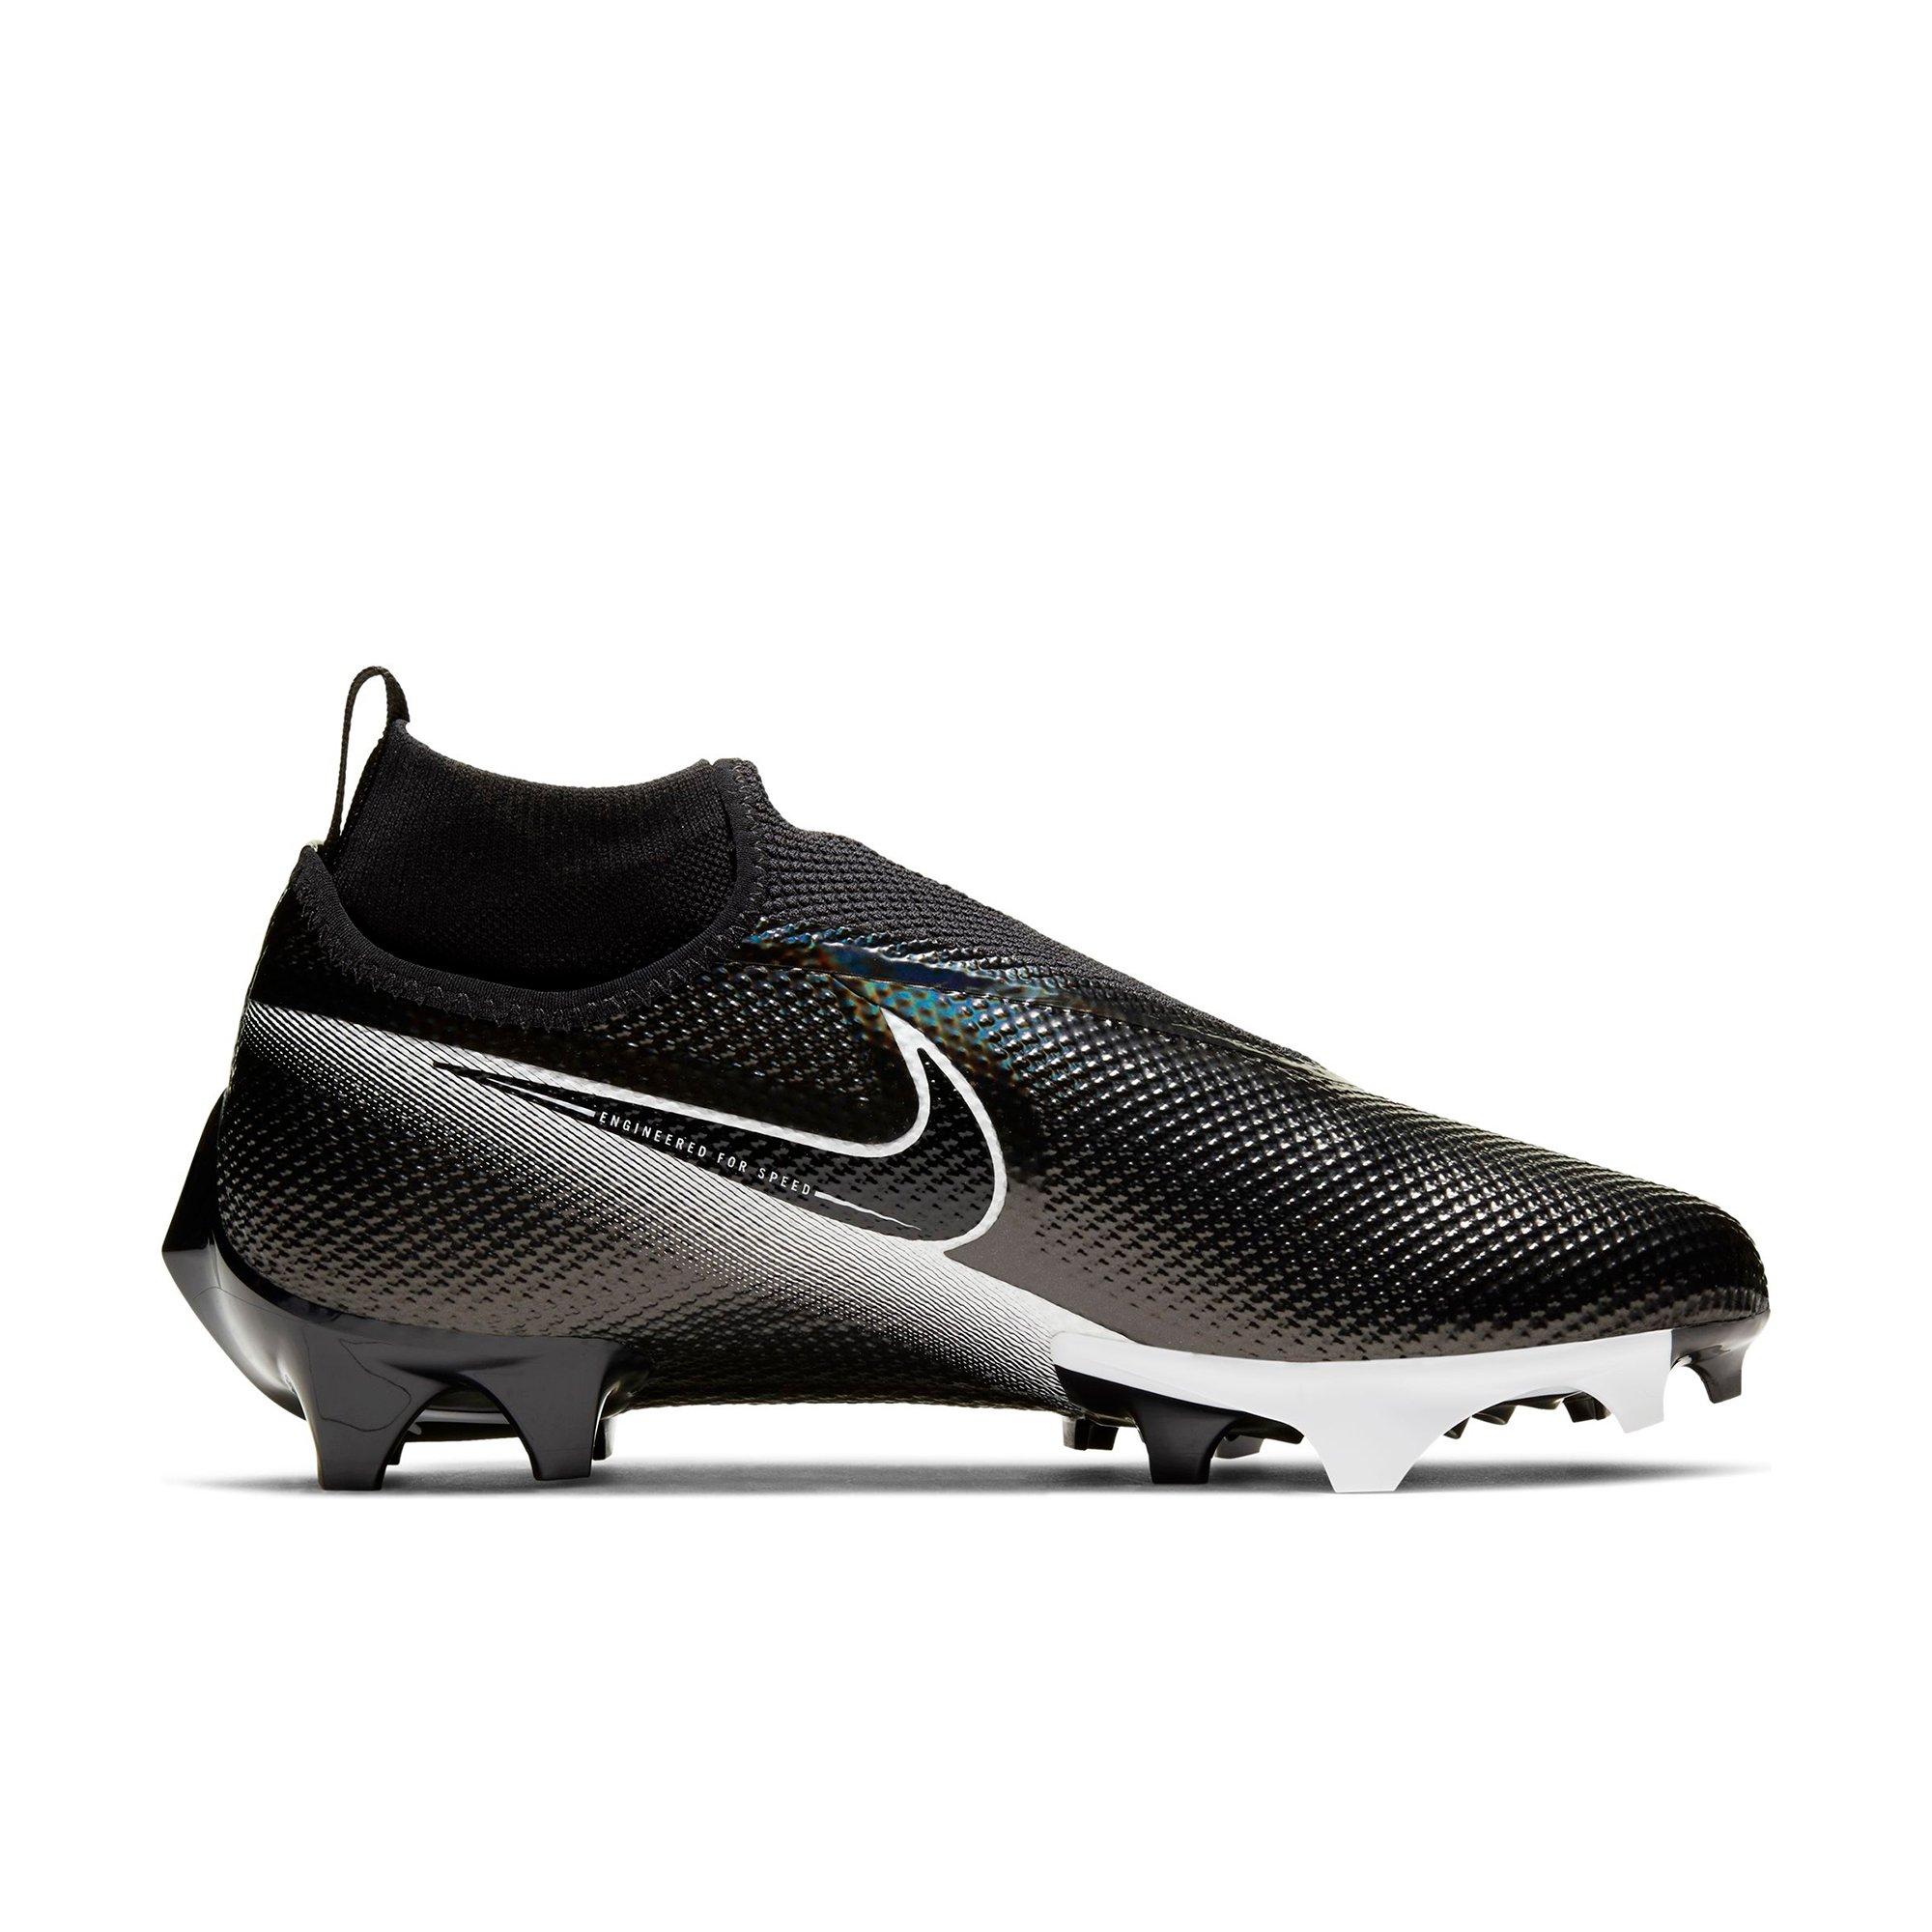 nike football shoes black and white